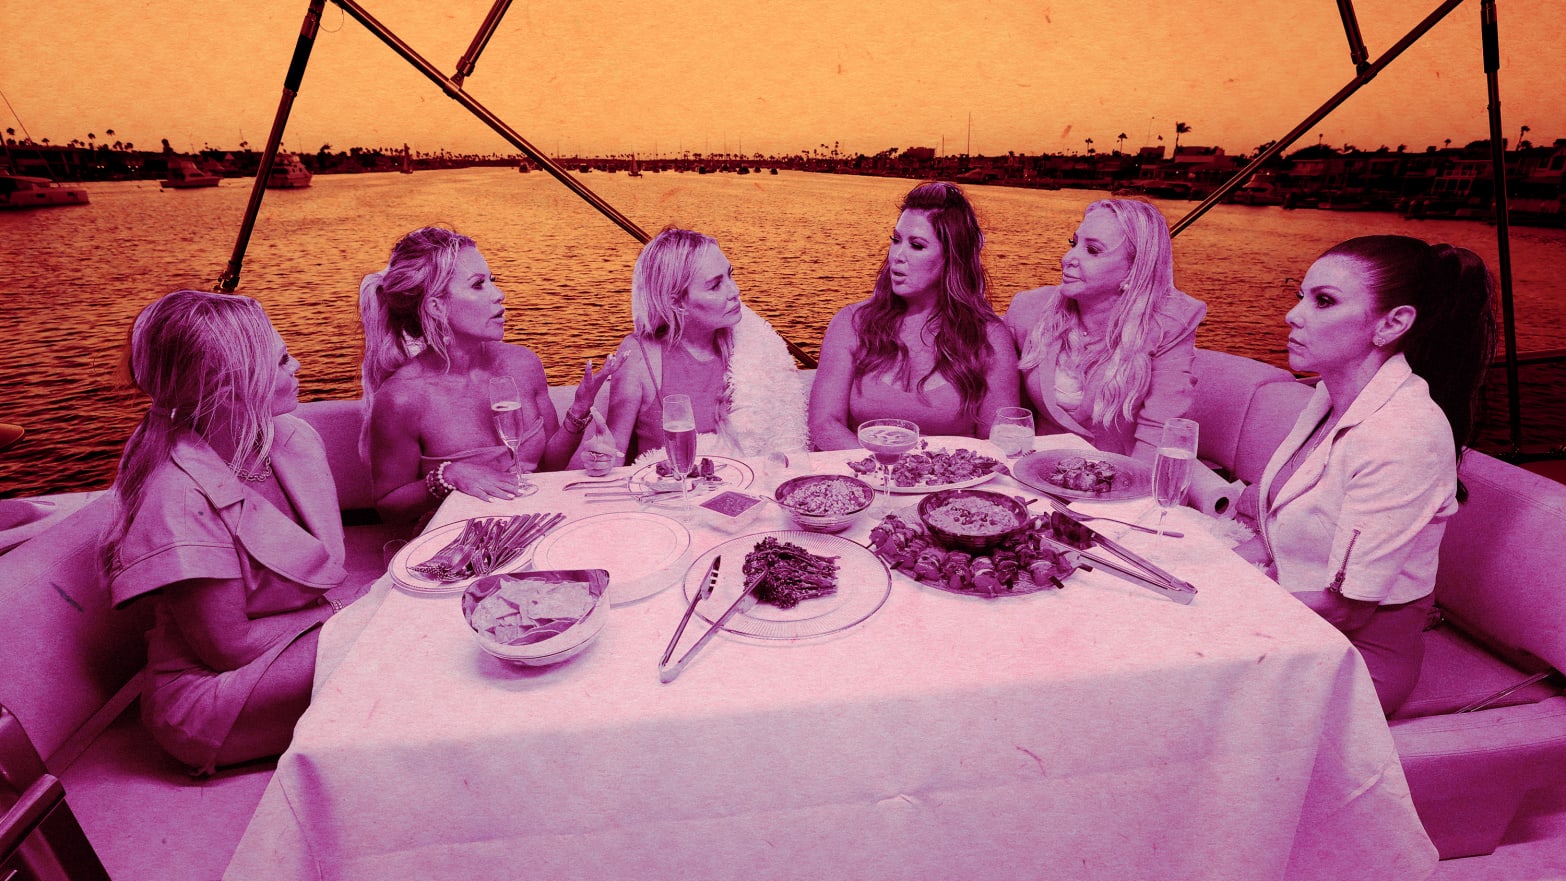 A photo illustration of Tamra Judge, Jennifer Pedranti, Taylor Armstrong, Emily Simpson, Shannon Storms Beador, Heather Dubrow on a boat during The Real Housewives of Orange County.